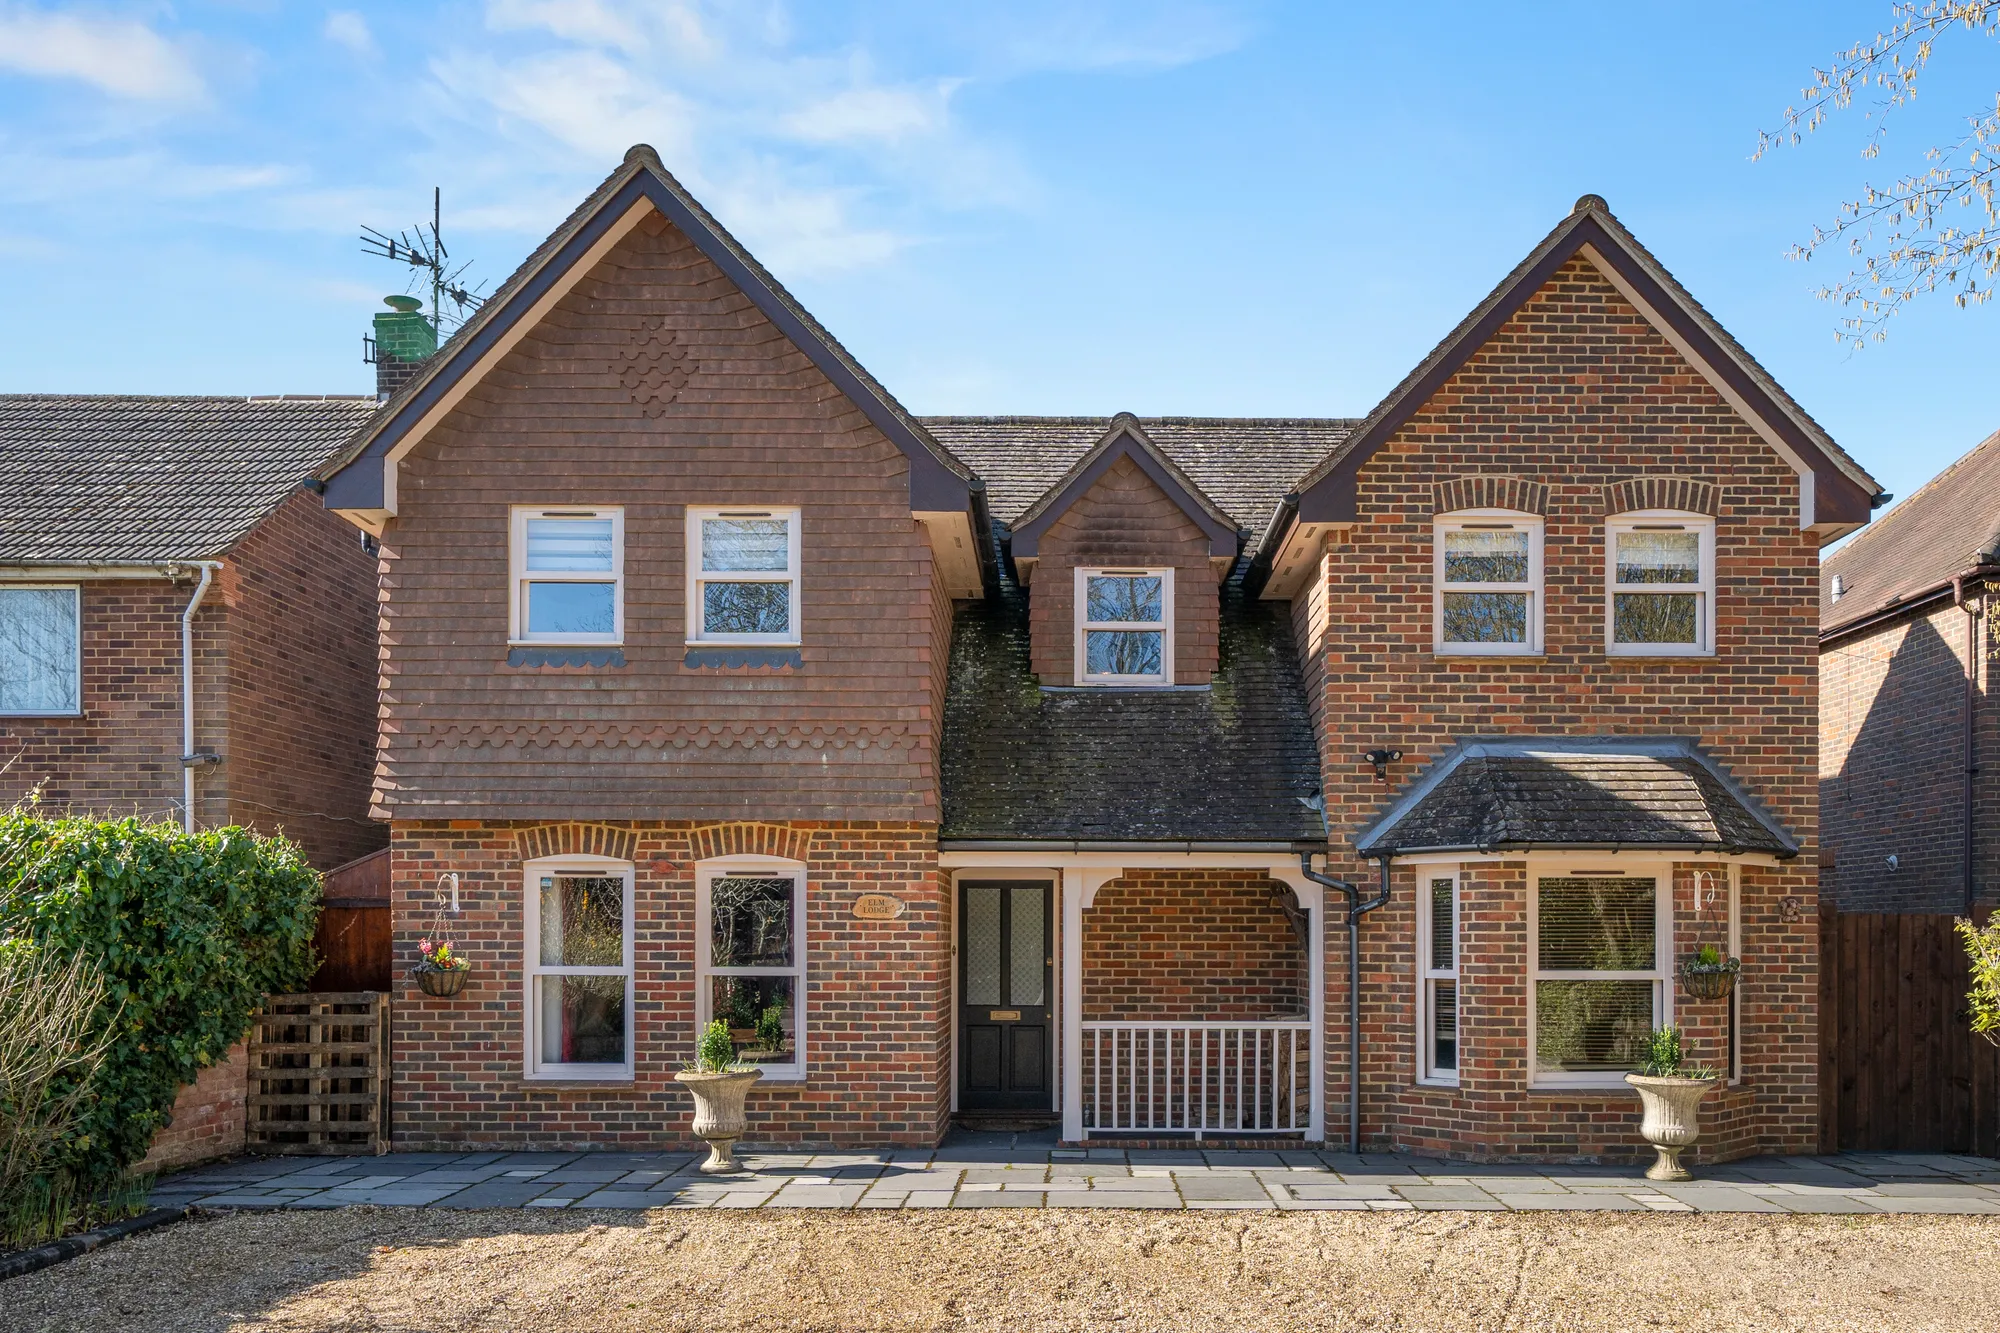 4 bed detached house for sale in Church Road, Windlesham 1